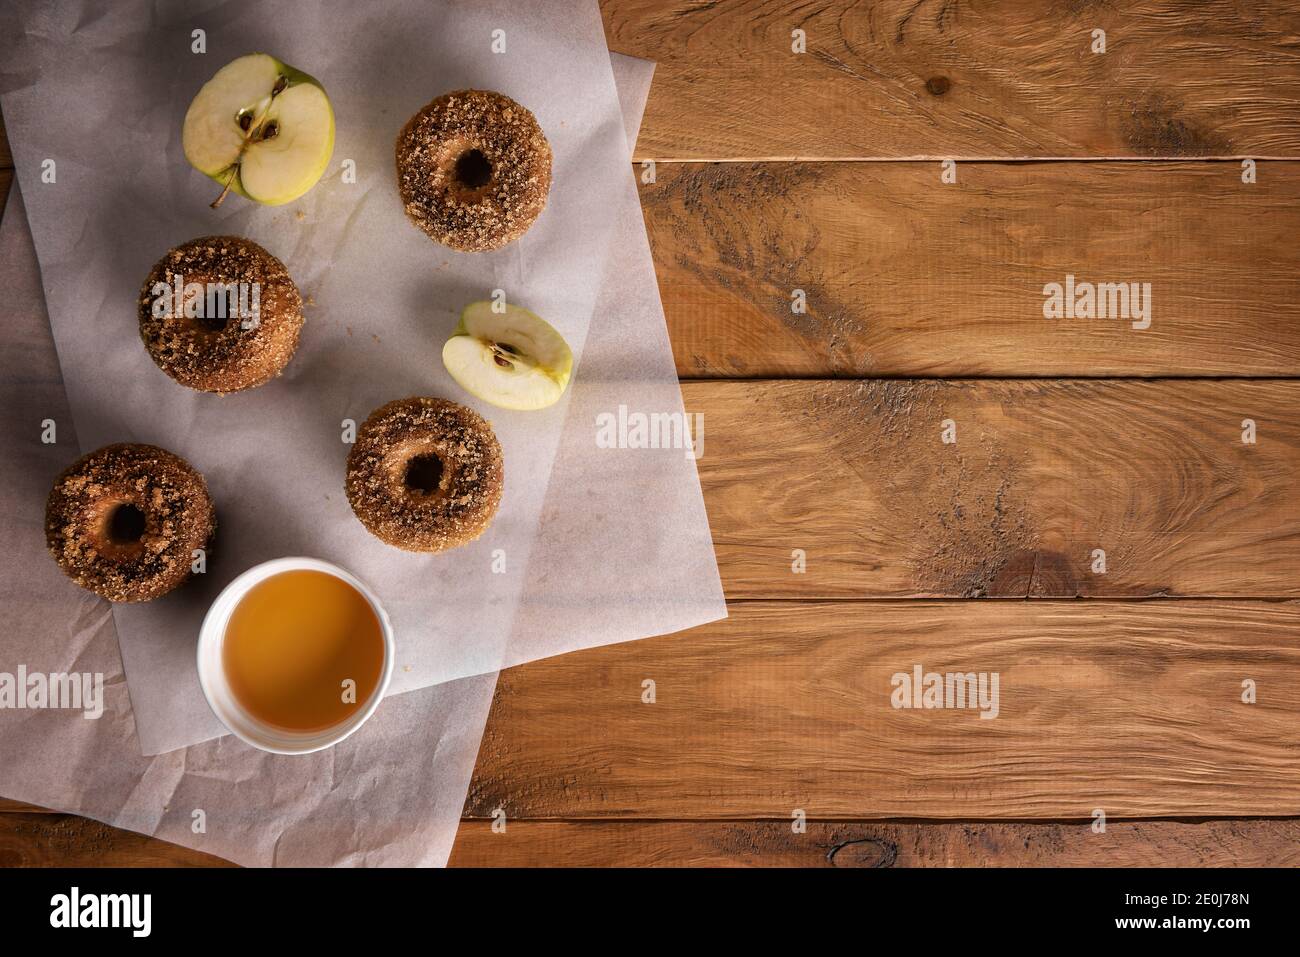 Baked donuts with apple cider and apple fruits on baking sheets on natural wooden table. Ready to eat snack. Small batch of homemade food. Directly ab Stock Photo